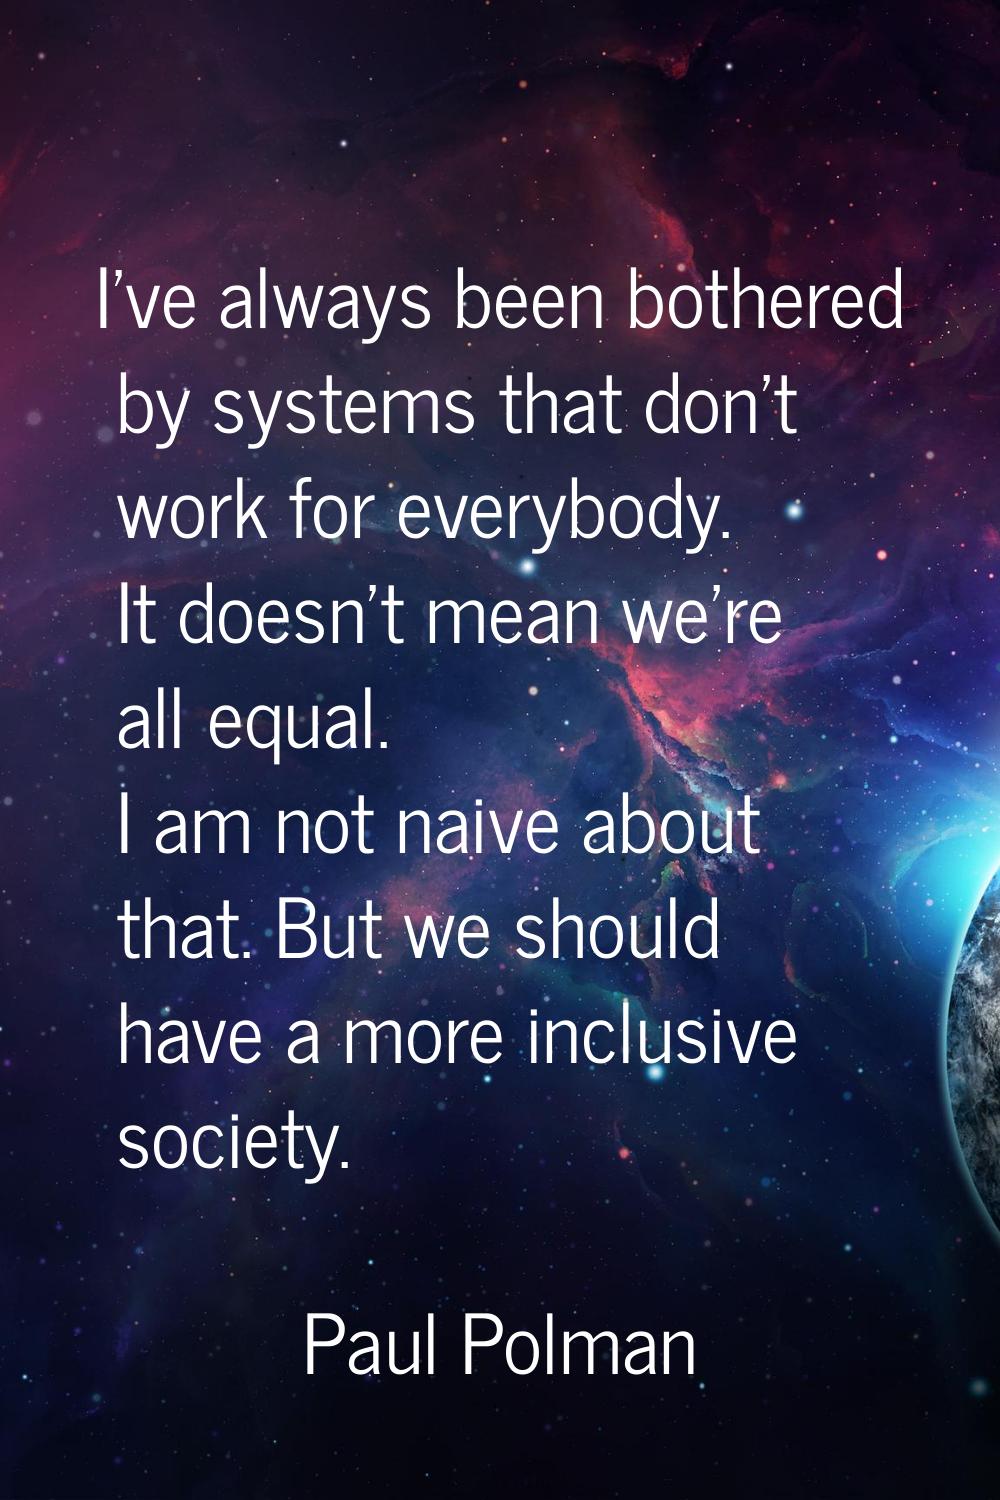 I've always been bothered by systems that don't work for everybody. It doesn't mean we're all equal